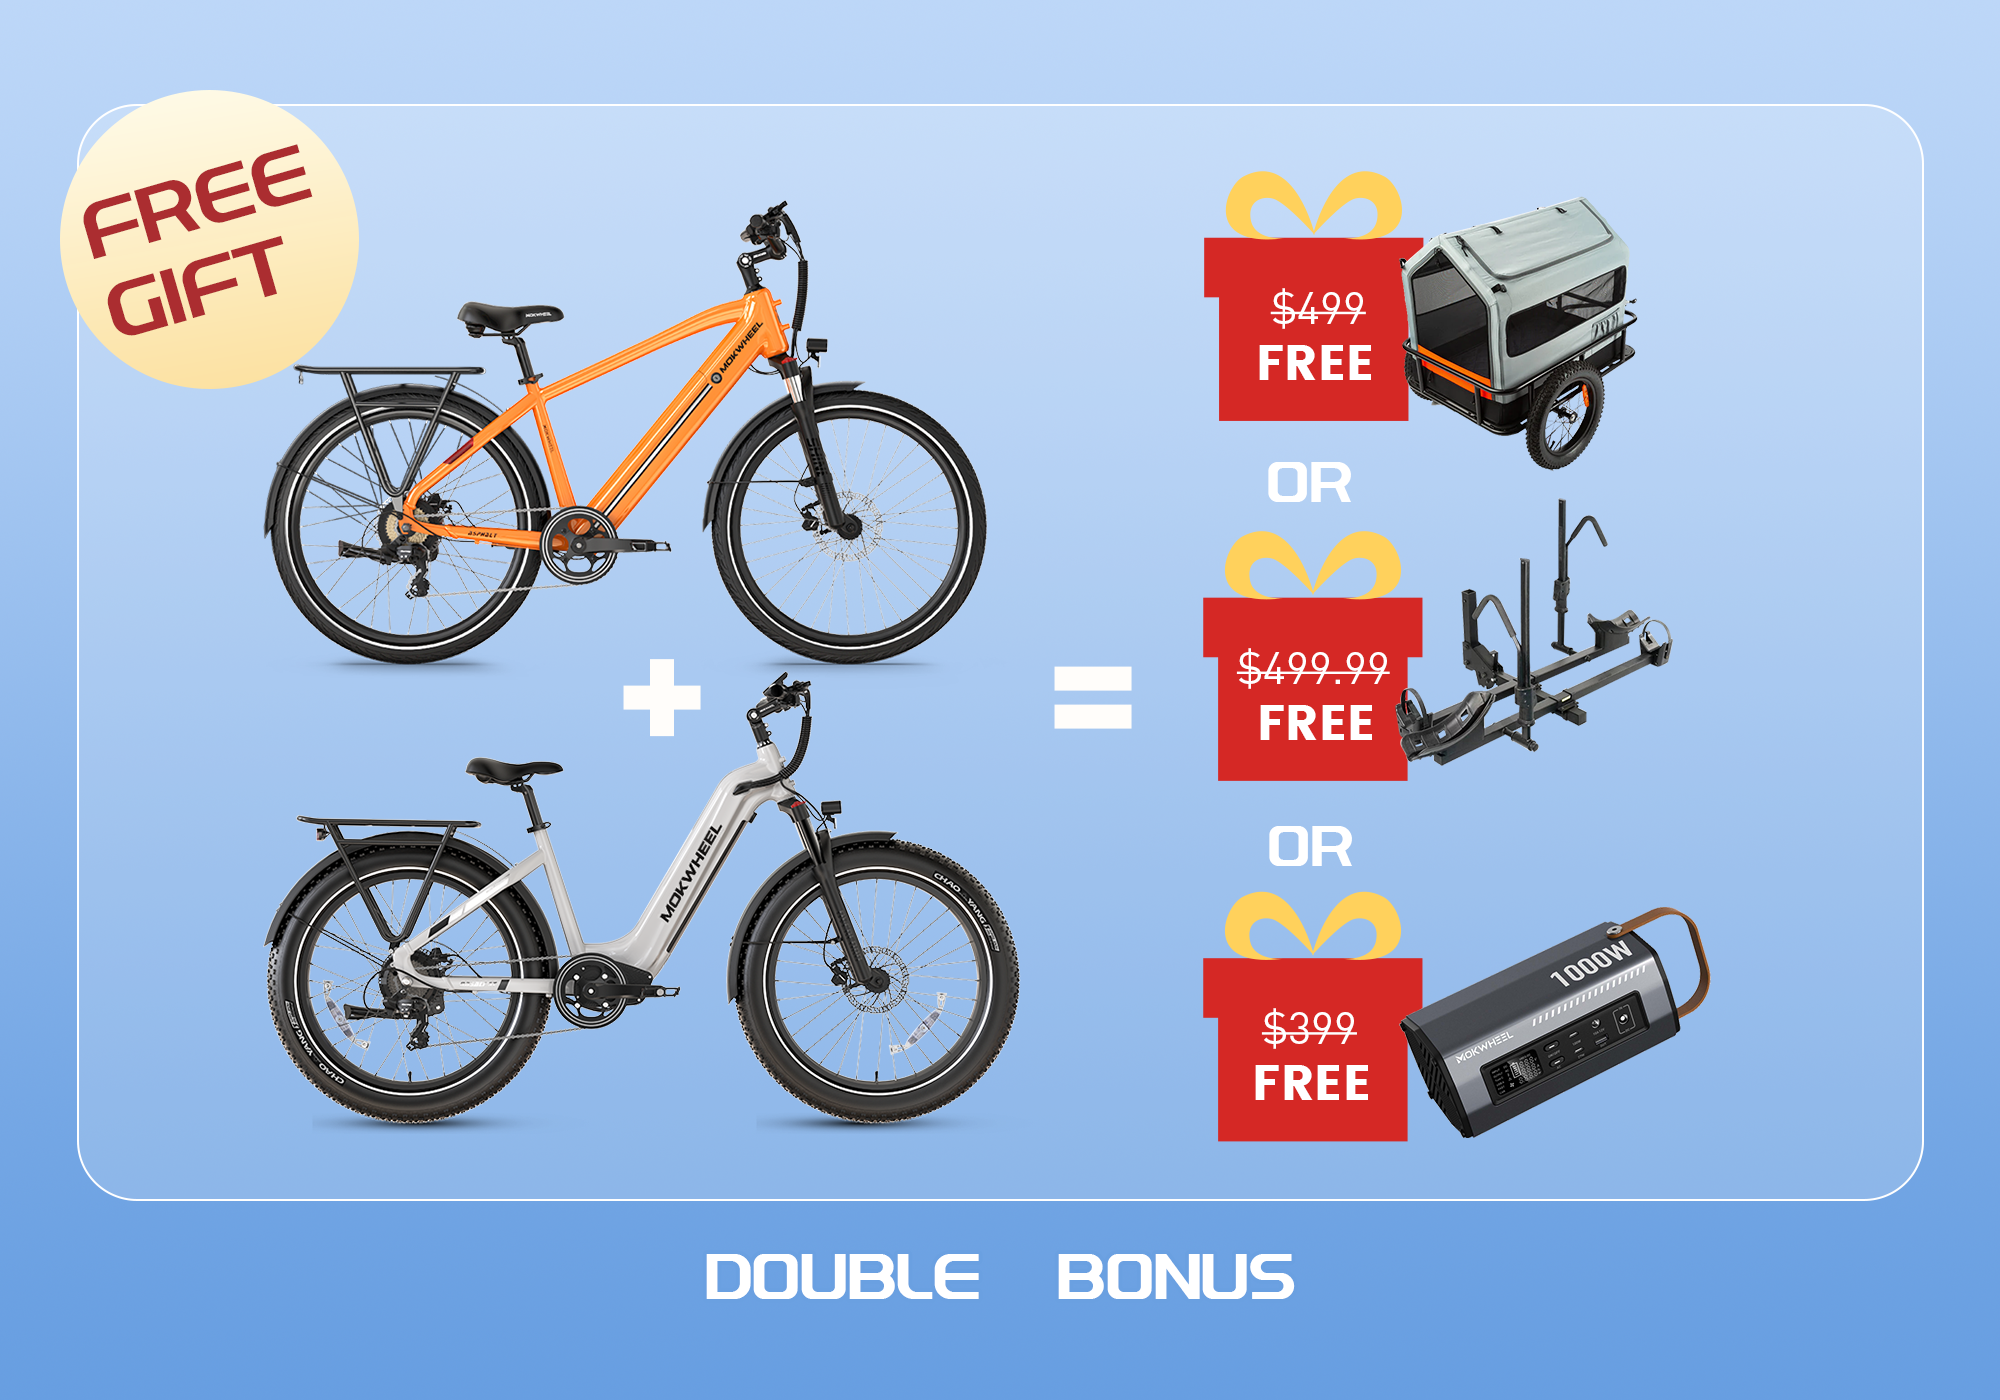 Buy two E-Bikes and get a FREE accessory!